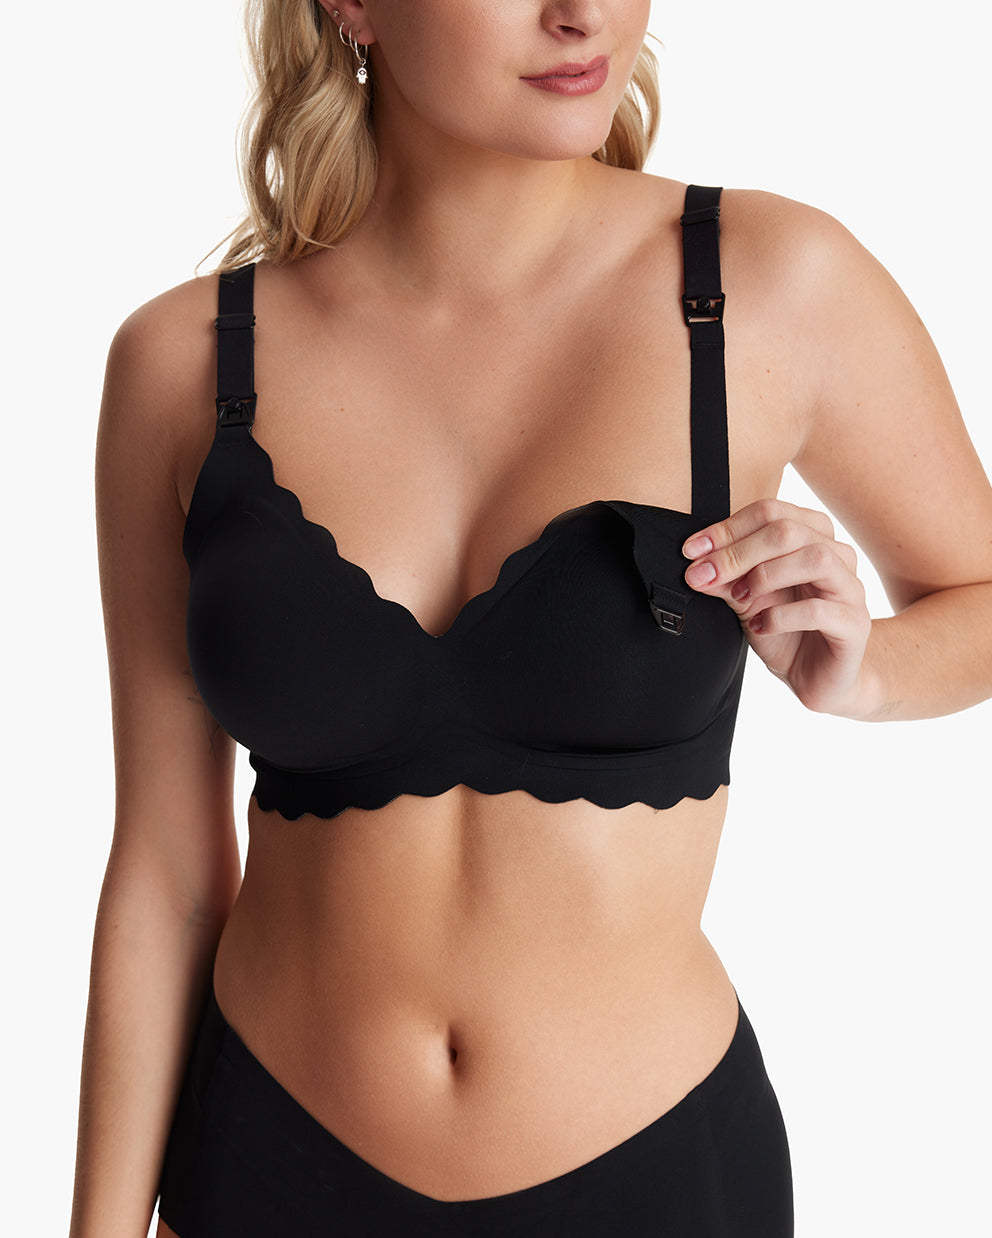 Get Cozy with Momcozy's Maternity Bra Sale: Extended